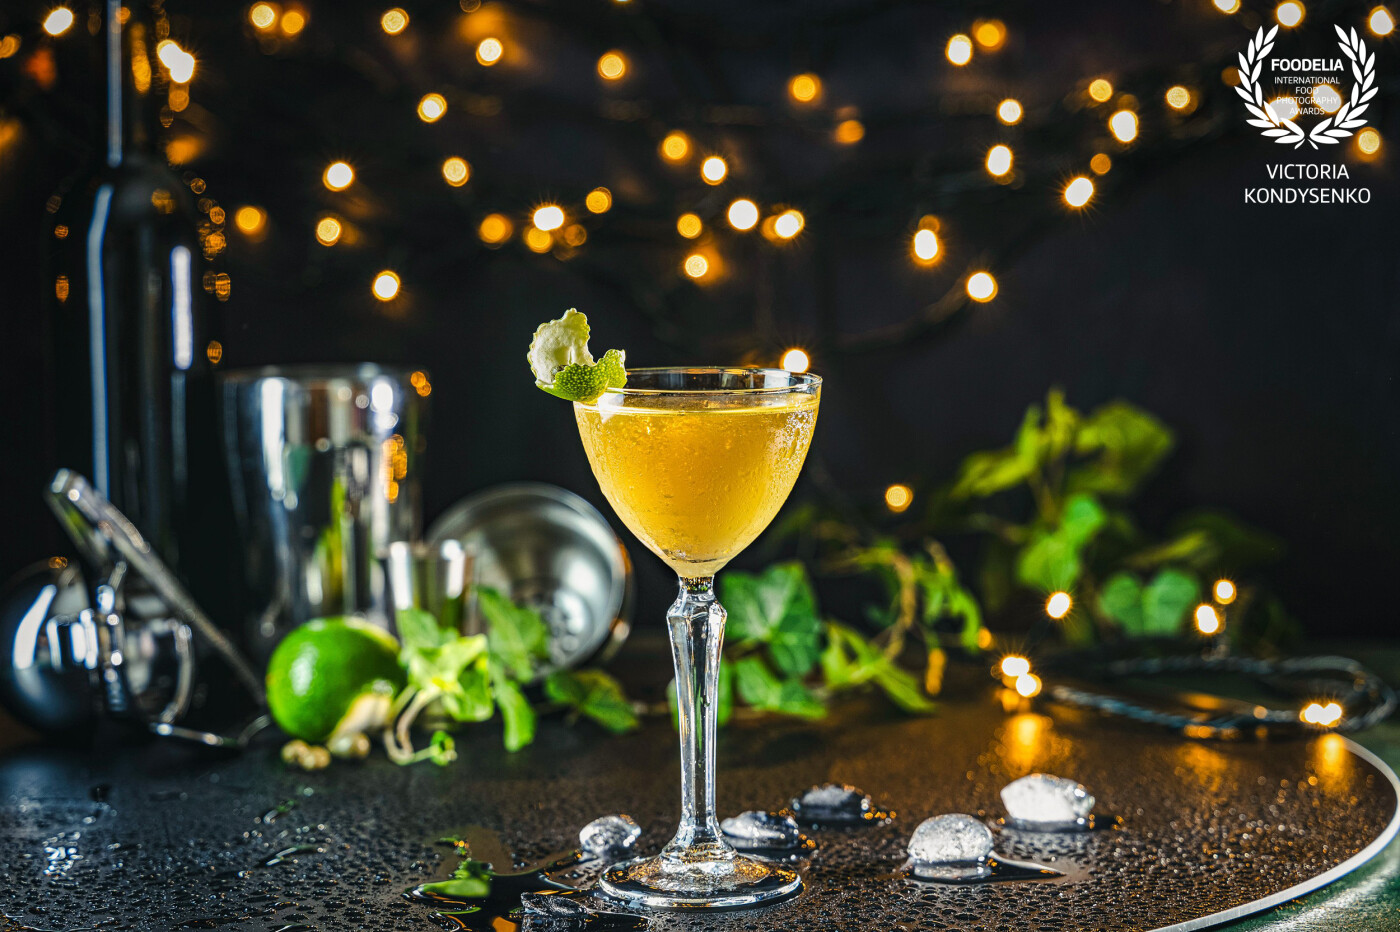 Original cocktail with dry gin, vermouth and sherry with the addition of a few drops of olive oil. Decorated twist de lima and capers